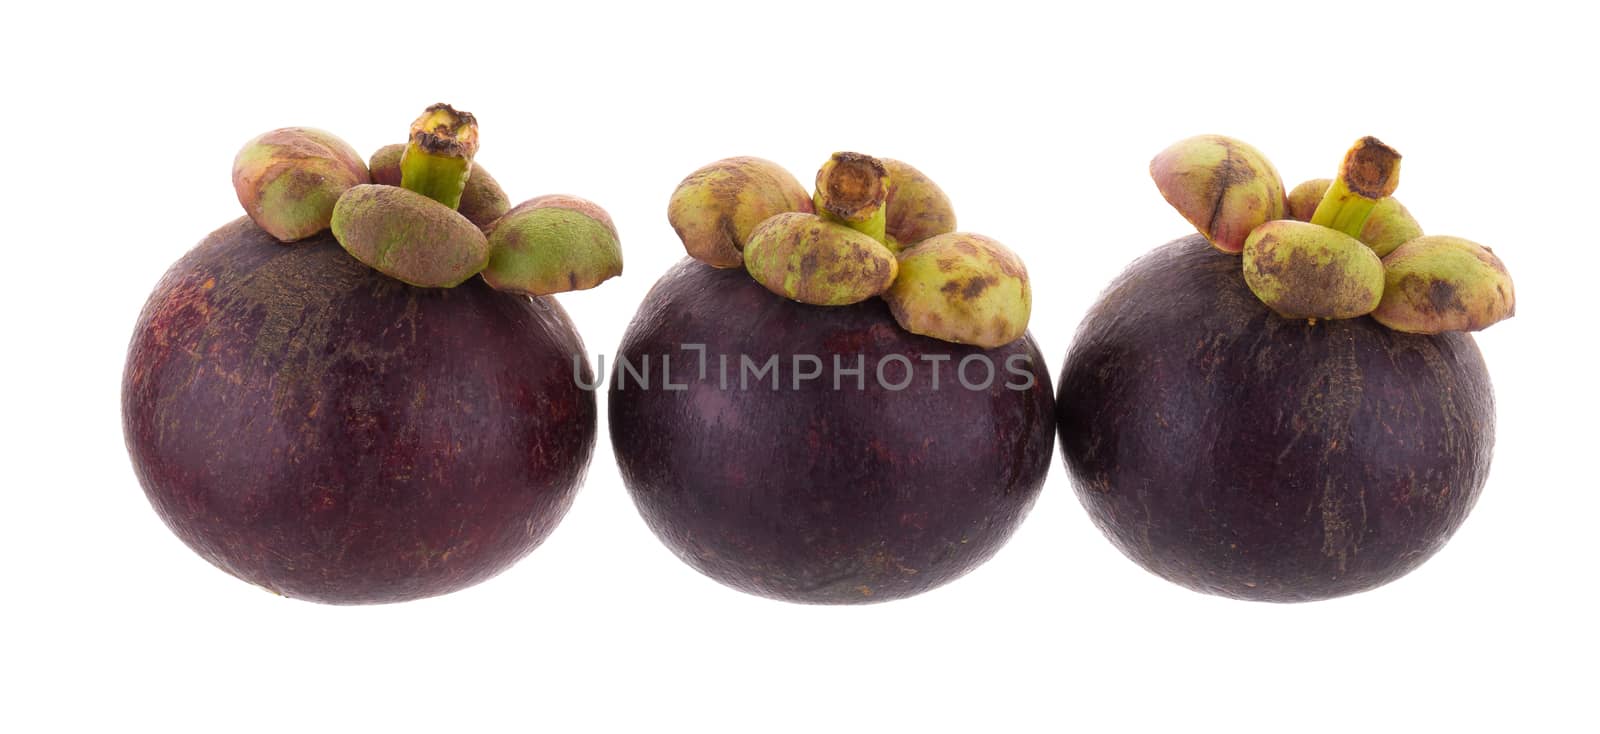 Mangosteens Queen of fruits, ripe mangosteen fruit isolated on w by kaiskynet